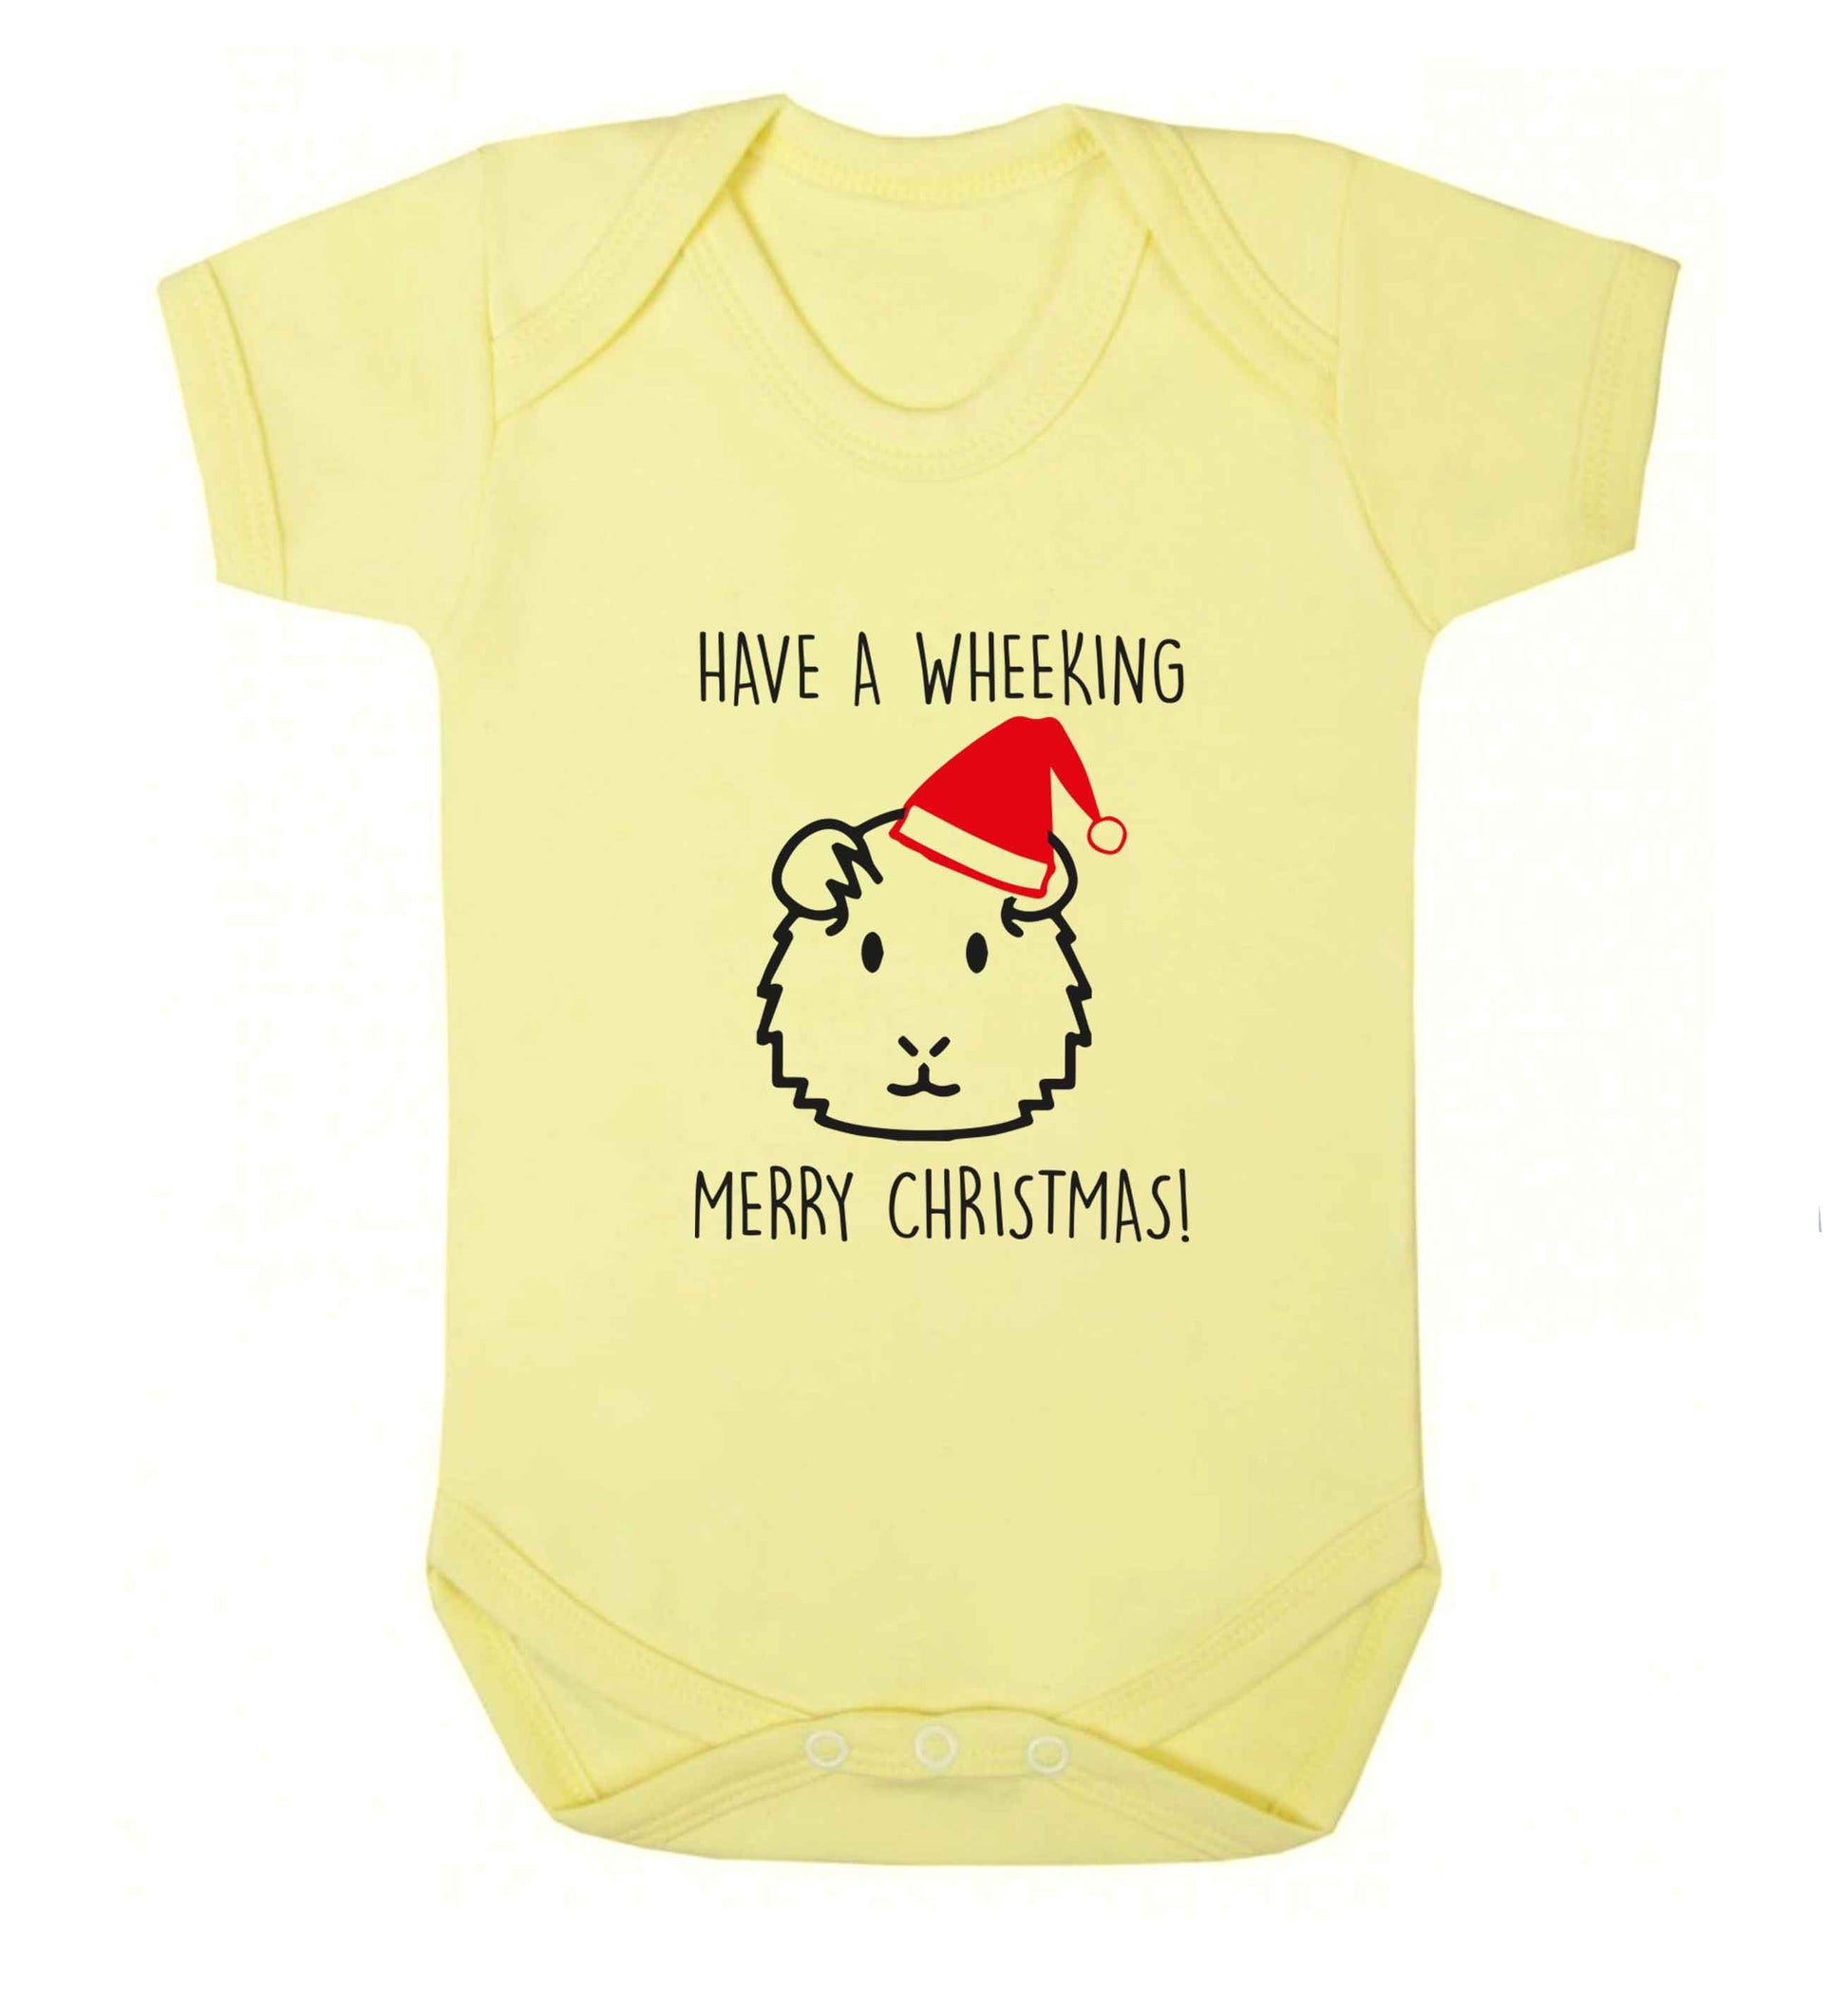 Have a wheeking merry Christmas baby vest pale yellow 18-24 months